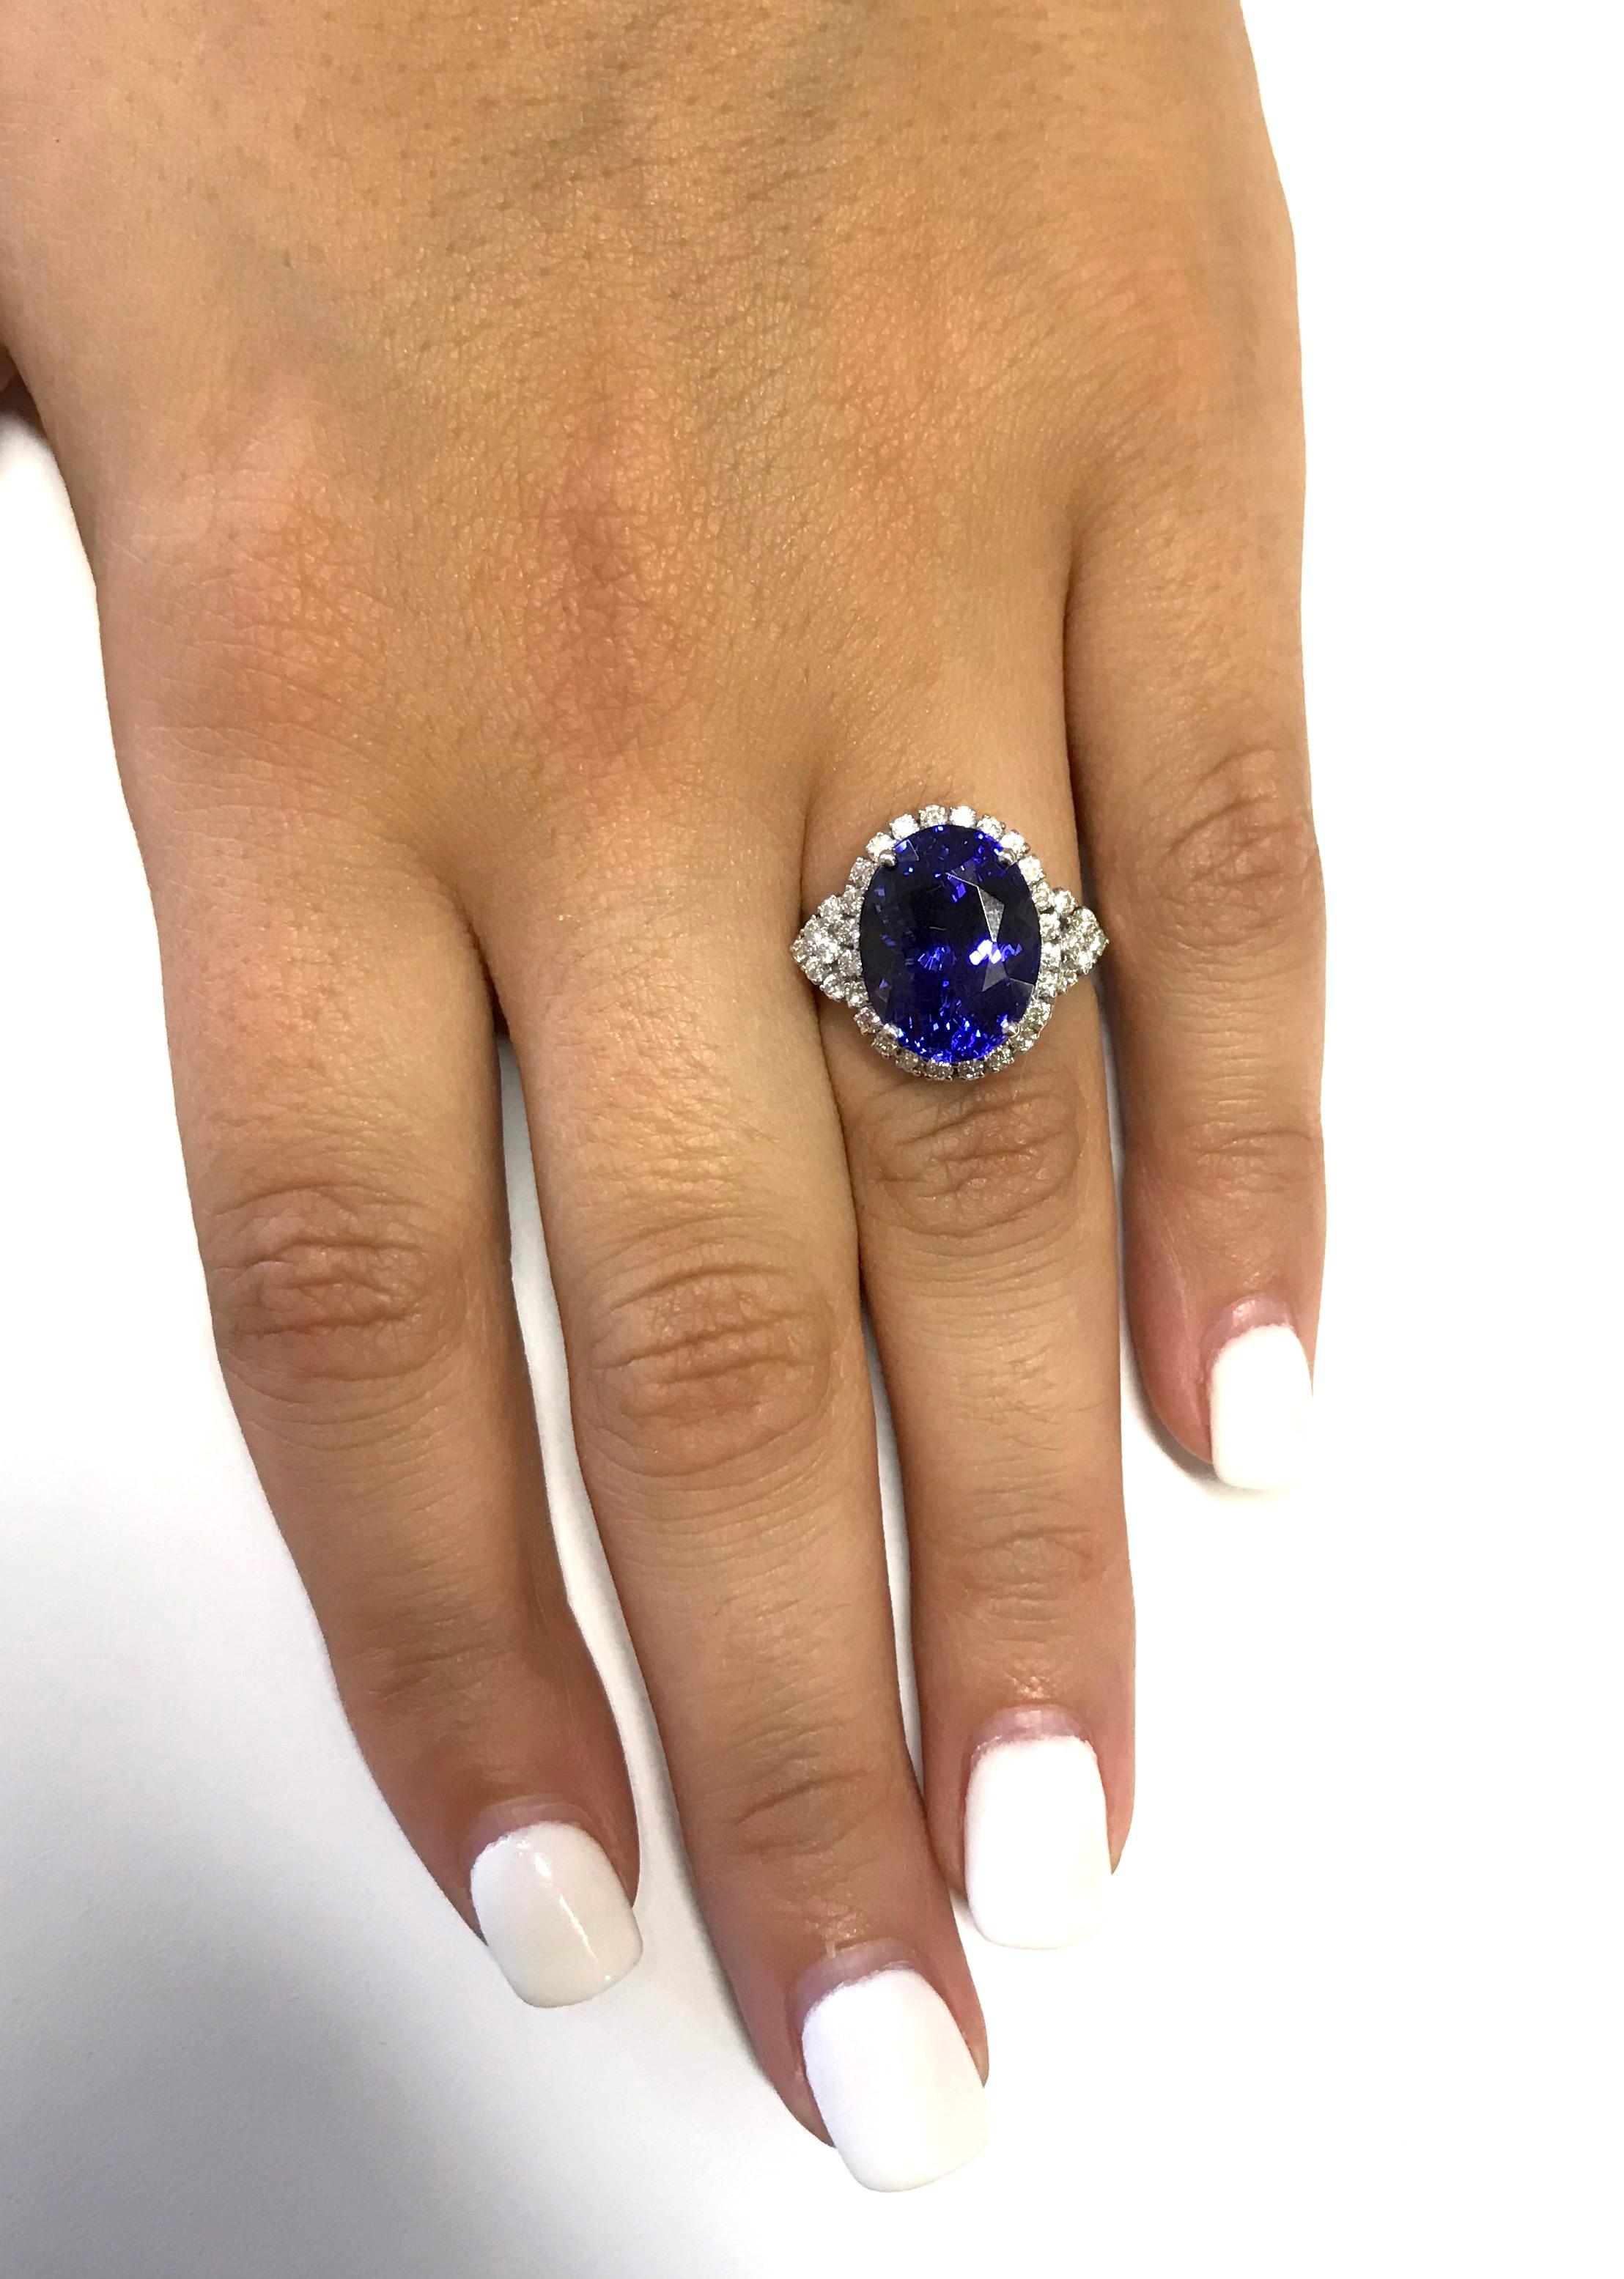 A truly stunning piece, this 8.28 Carat Oval Tanzanite shines against its 14K White Gold setting encased with brilliant white diamonds. A piece to treasure for years to come! 

Material: 14k White Gold 
Center Stone Details: 8.28 Carat Oval